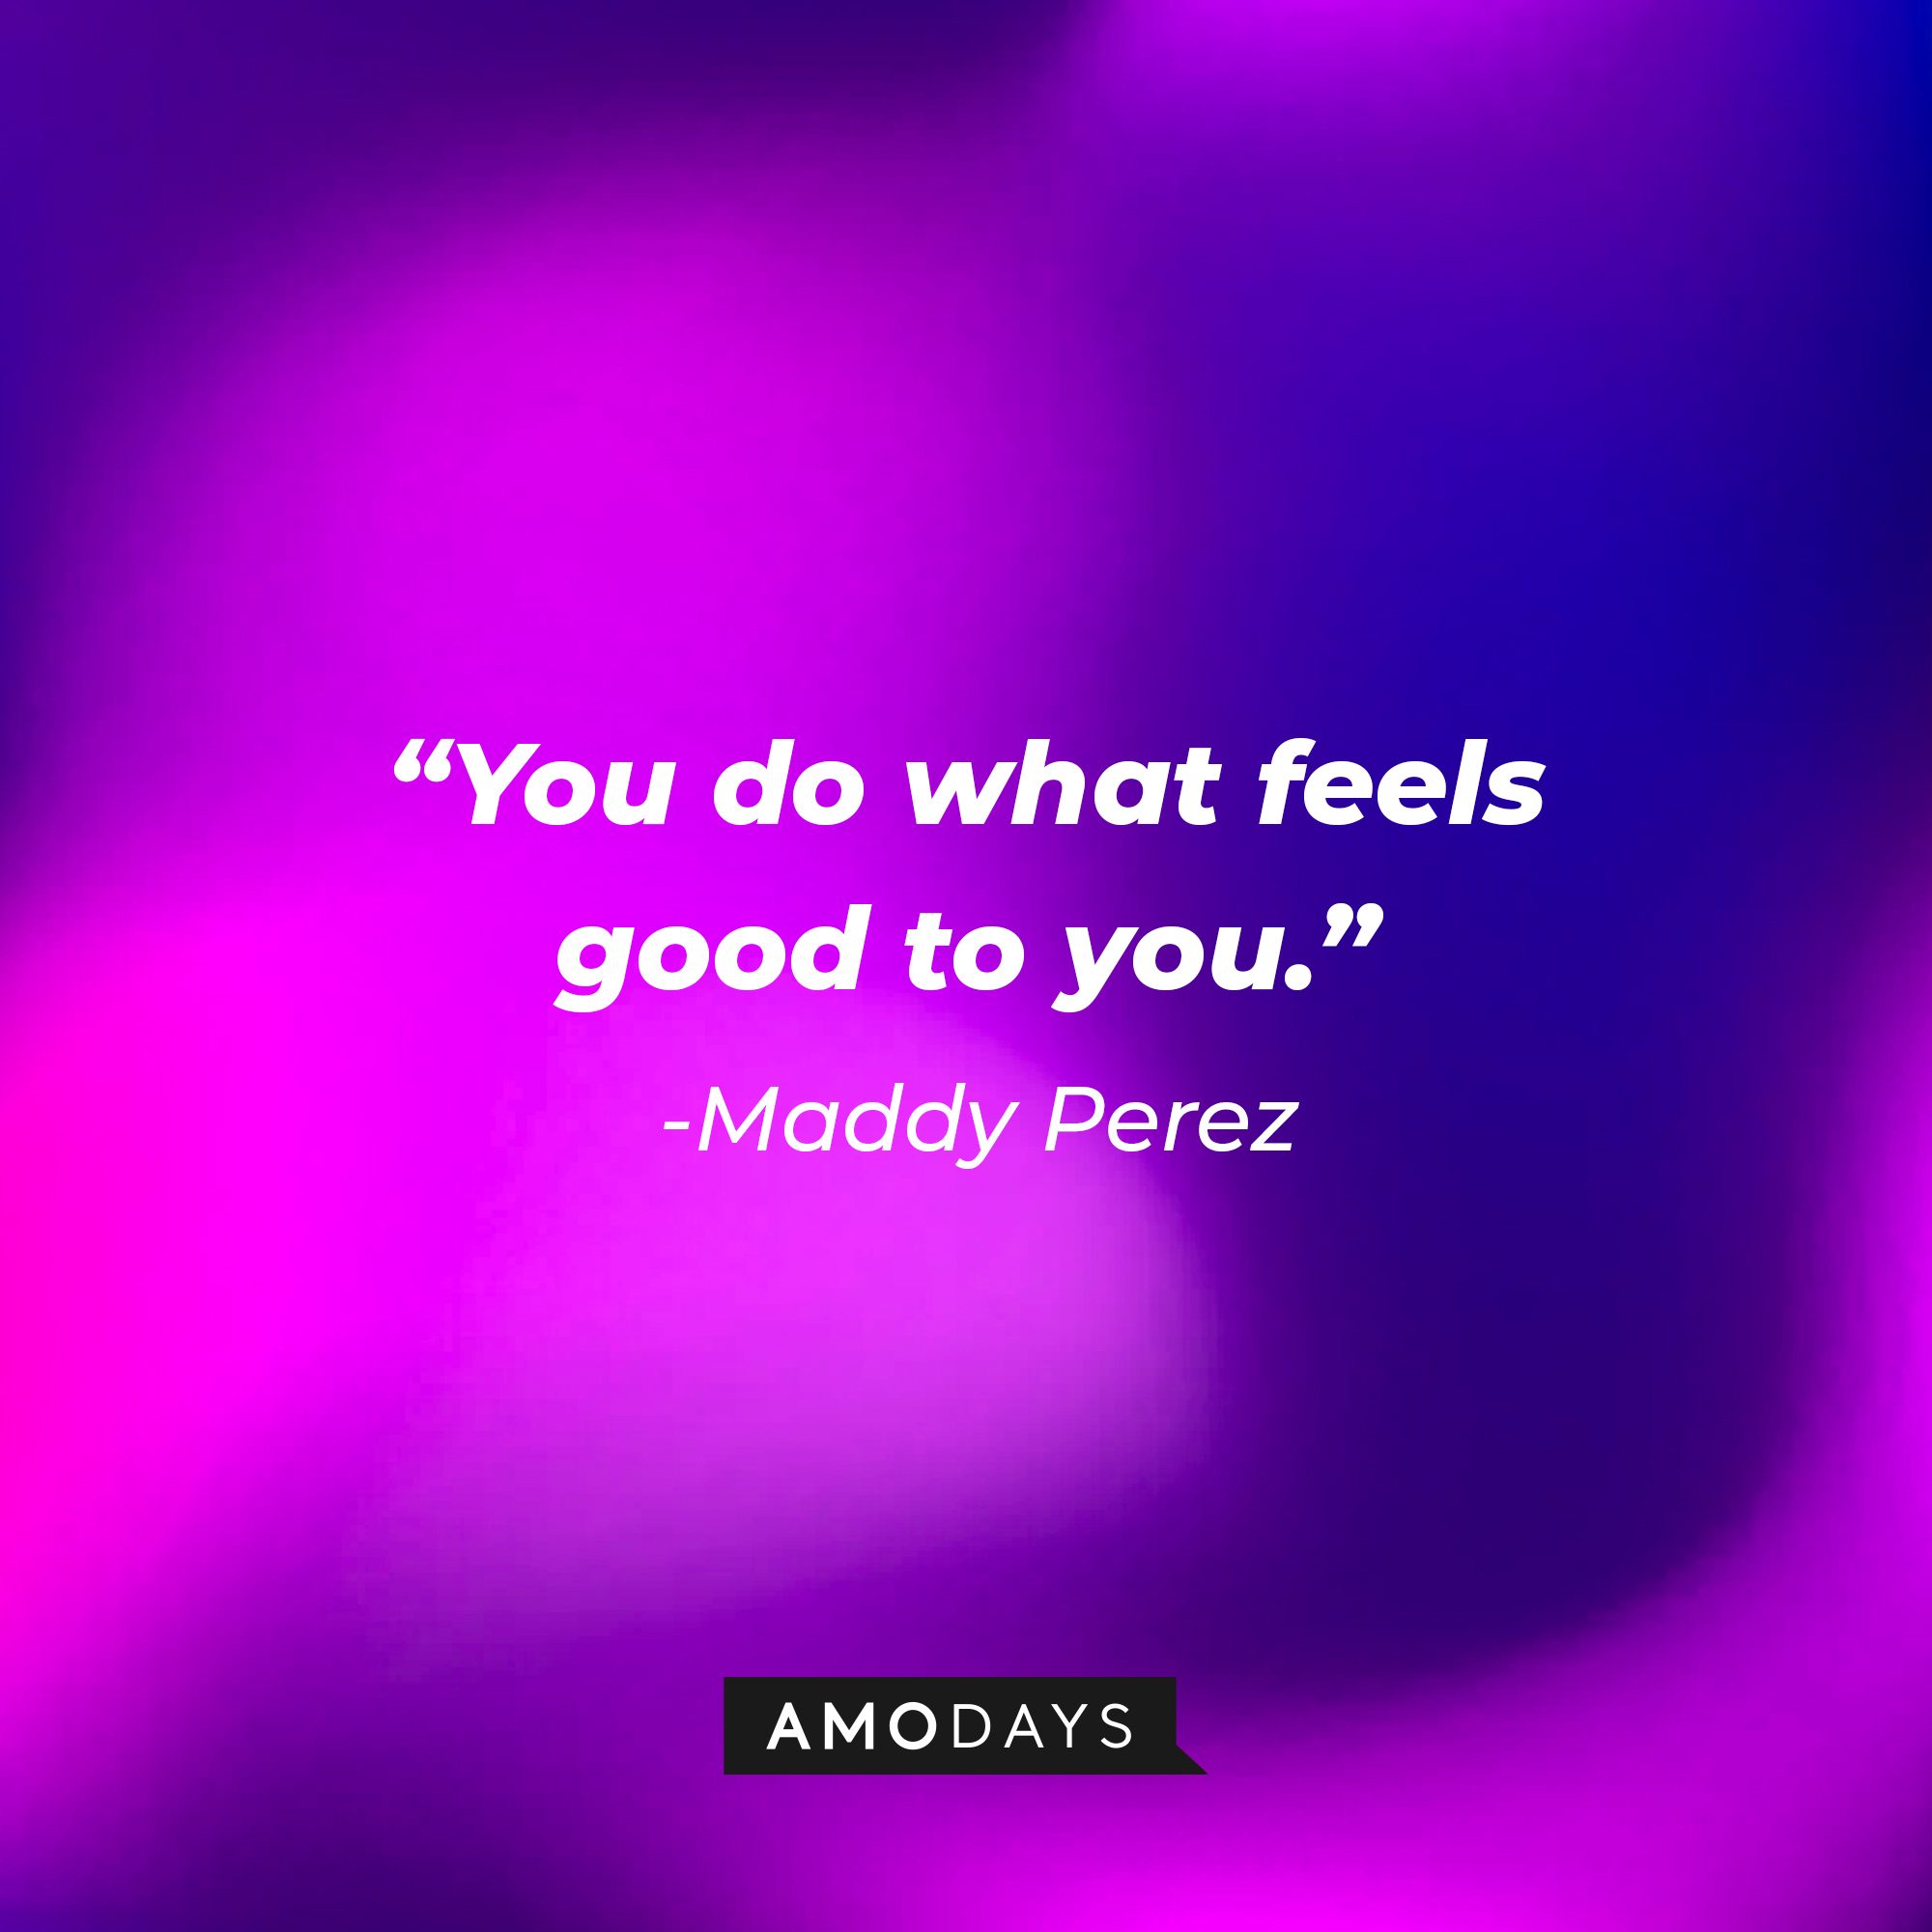 Maddy Perez’ quote: “You do what feels good to you.” | Source: AmoDays